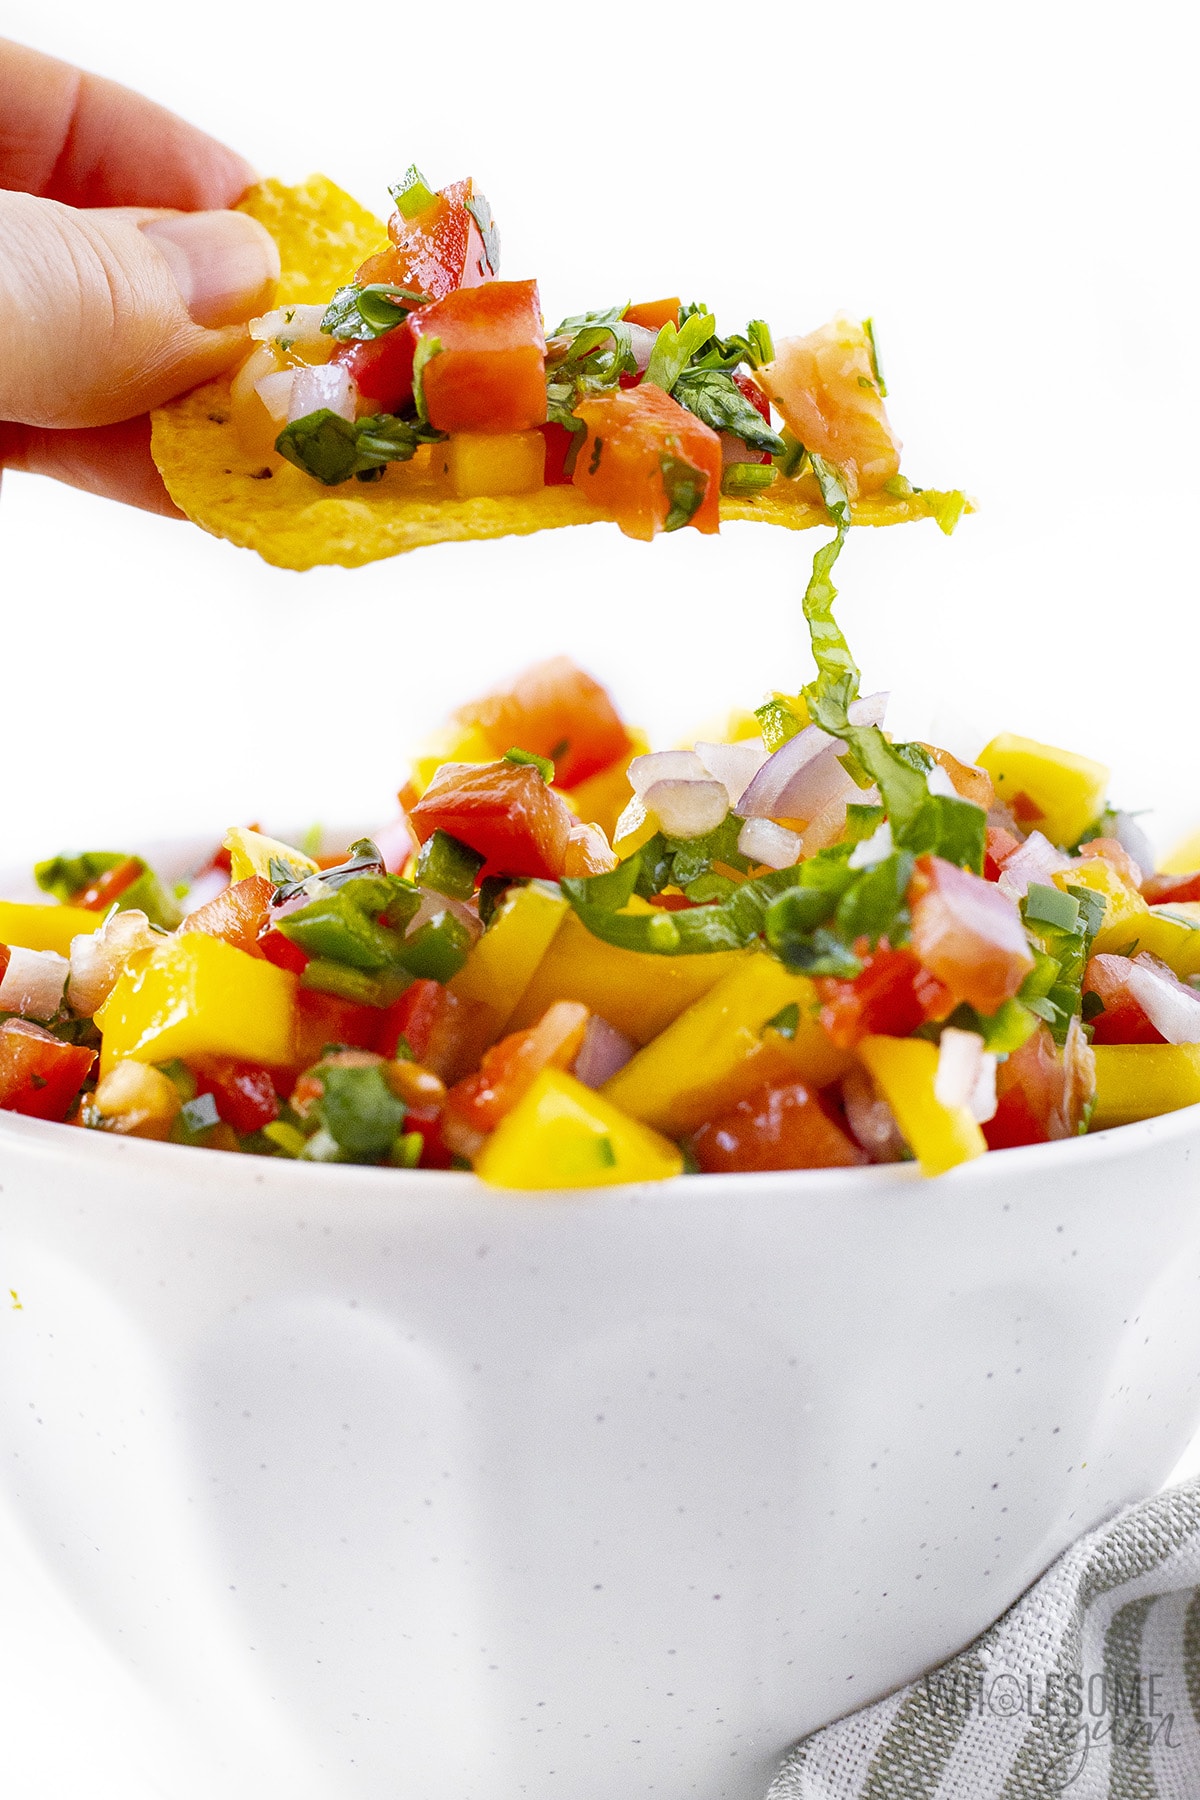 Chip holding a scoop of mango salsa.